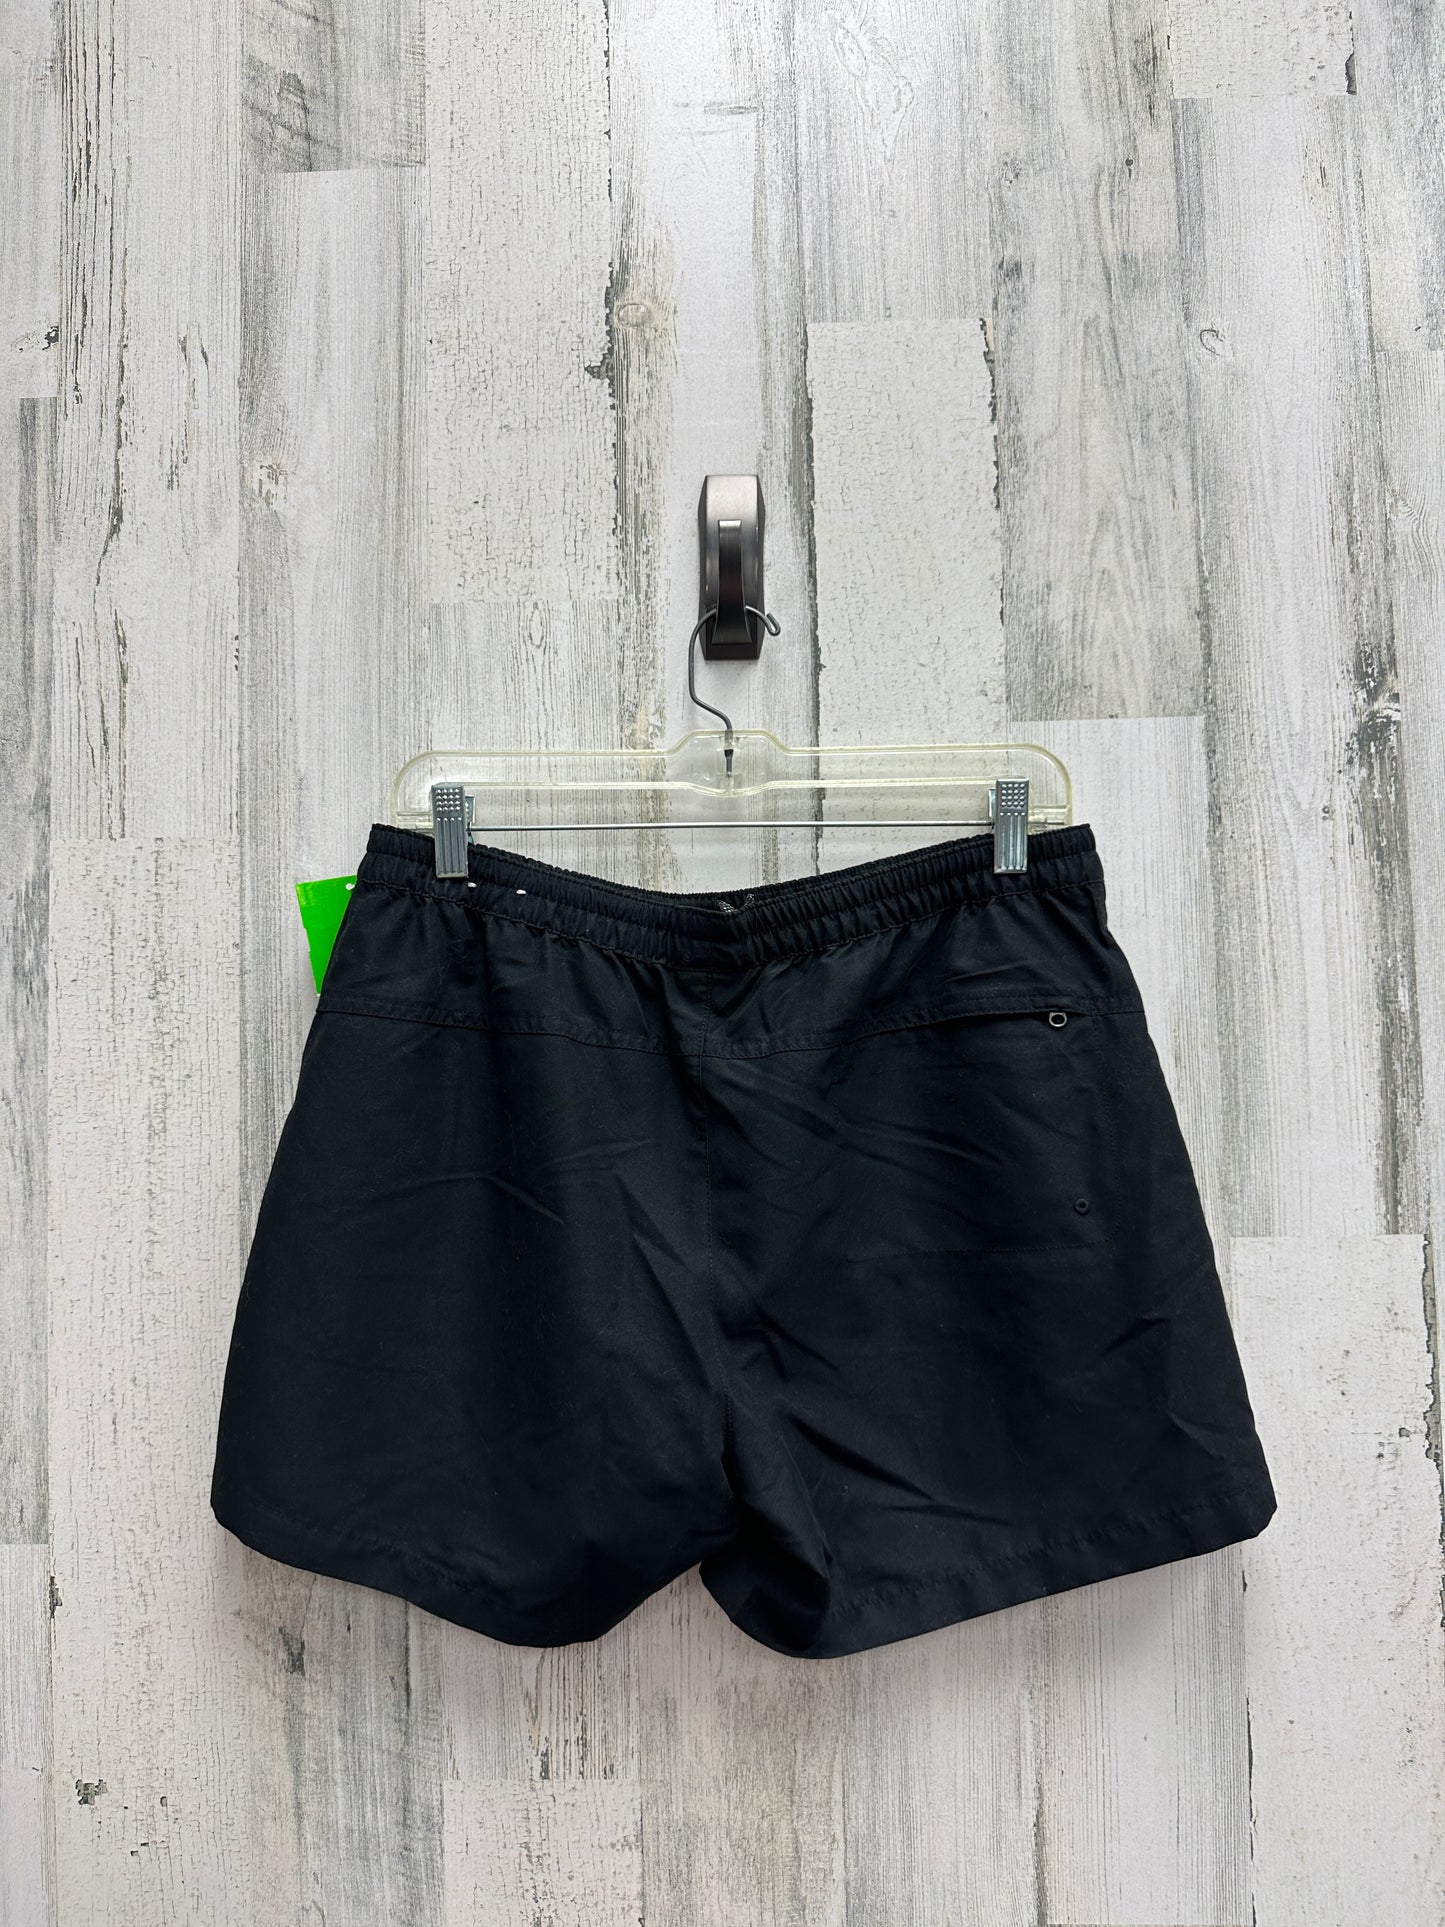 Shorts By North Face  Size: M